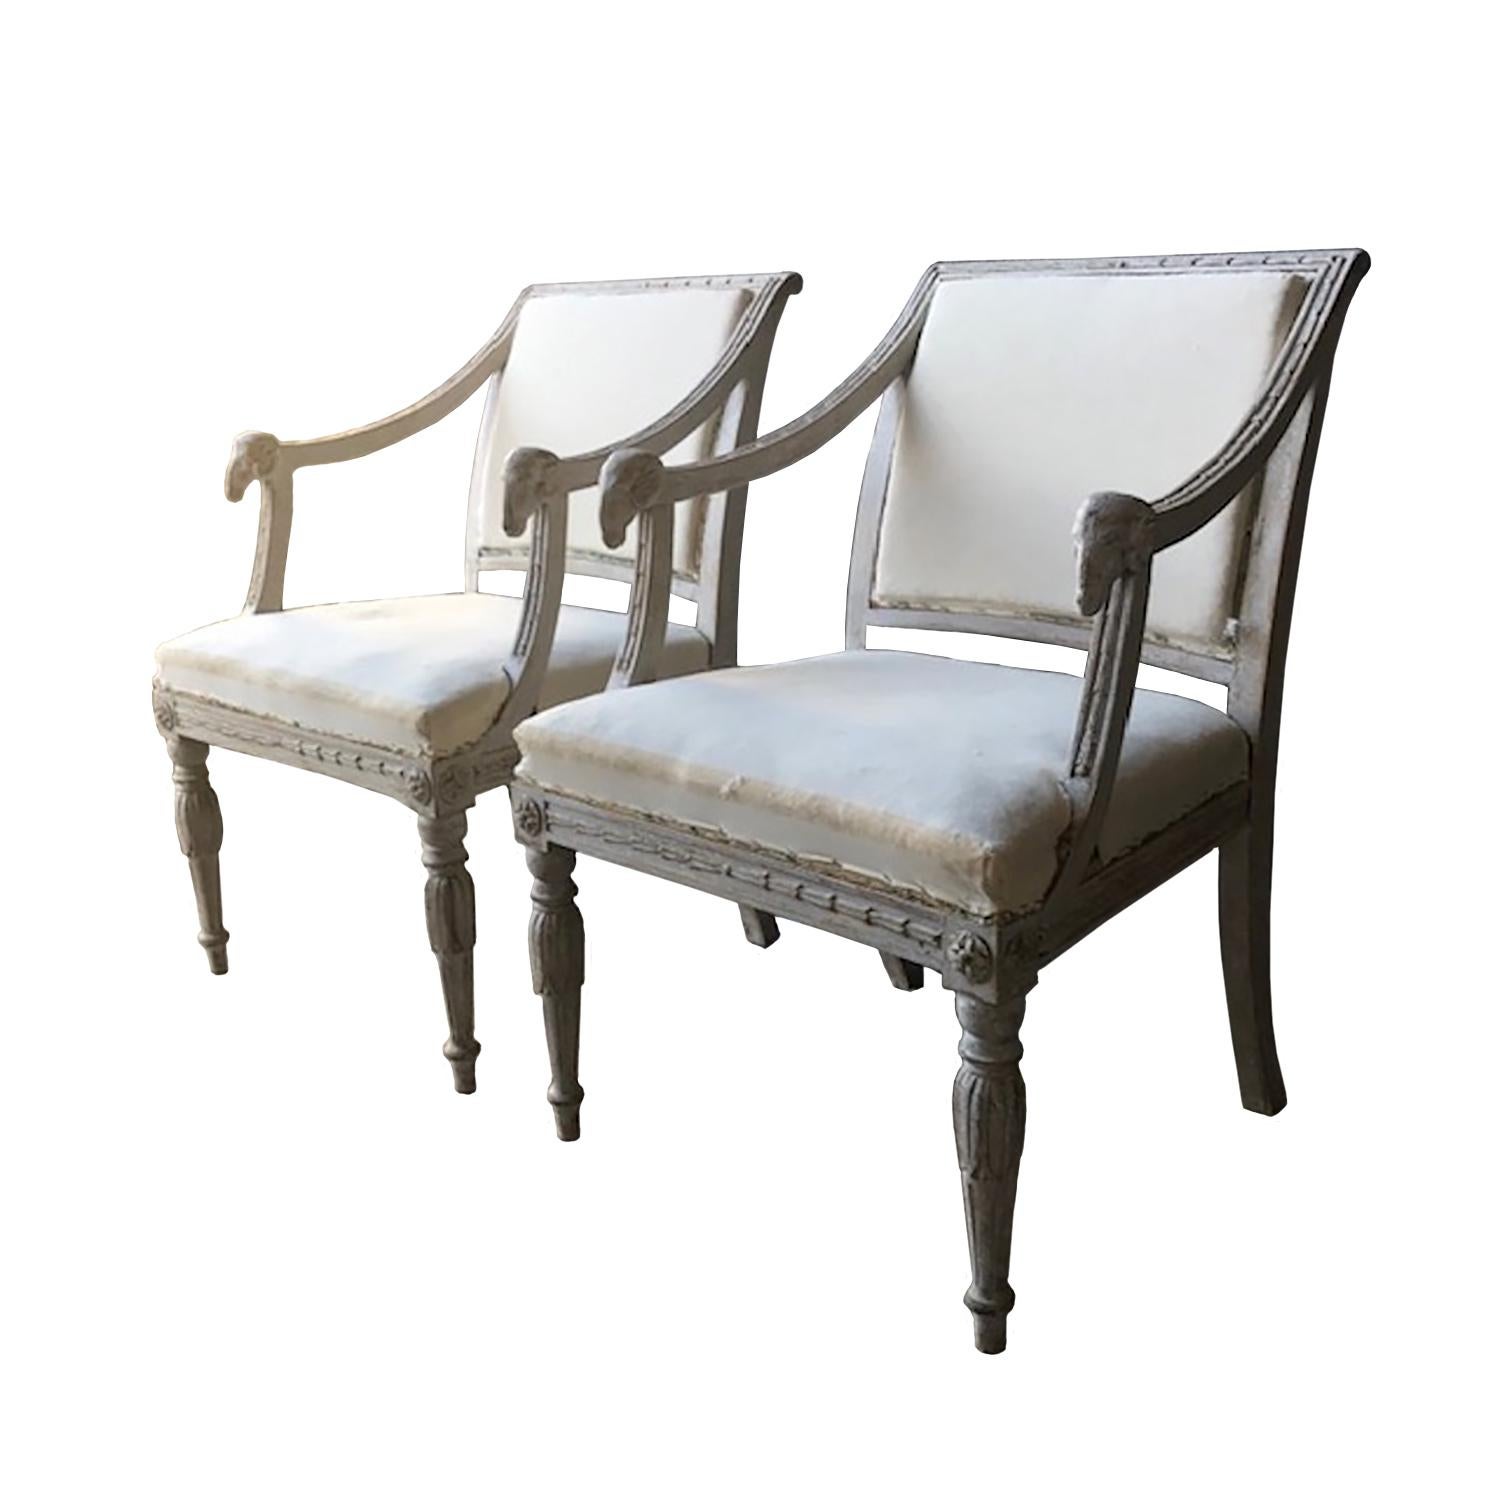 This exceptional pair of Swedish 19th century chairs feature carved decorative detailing with ram heads.